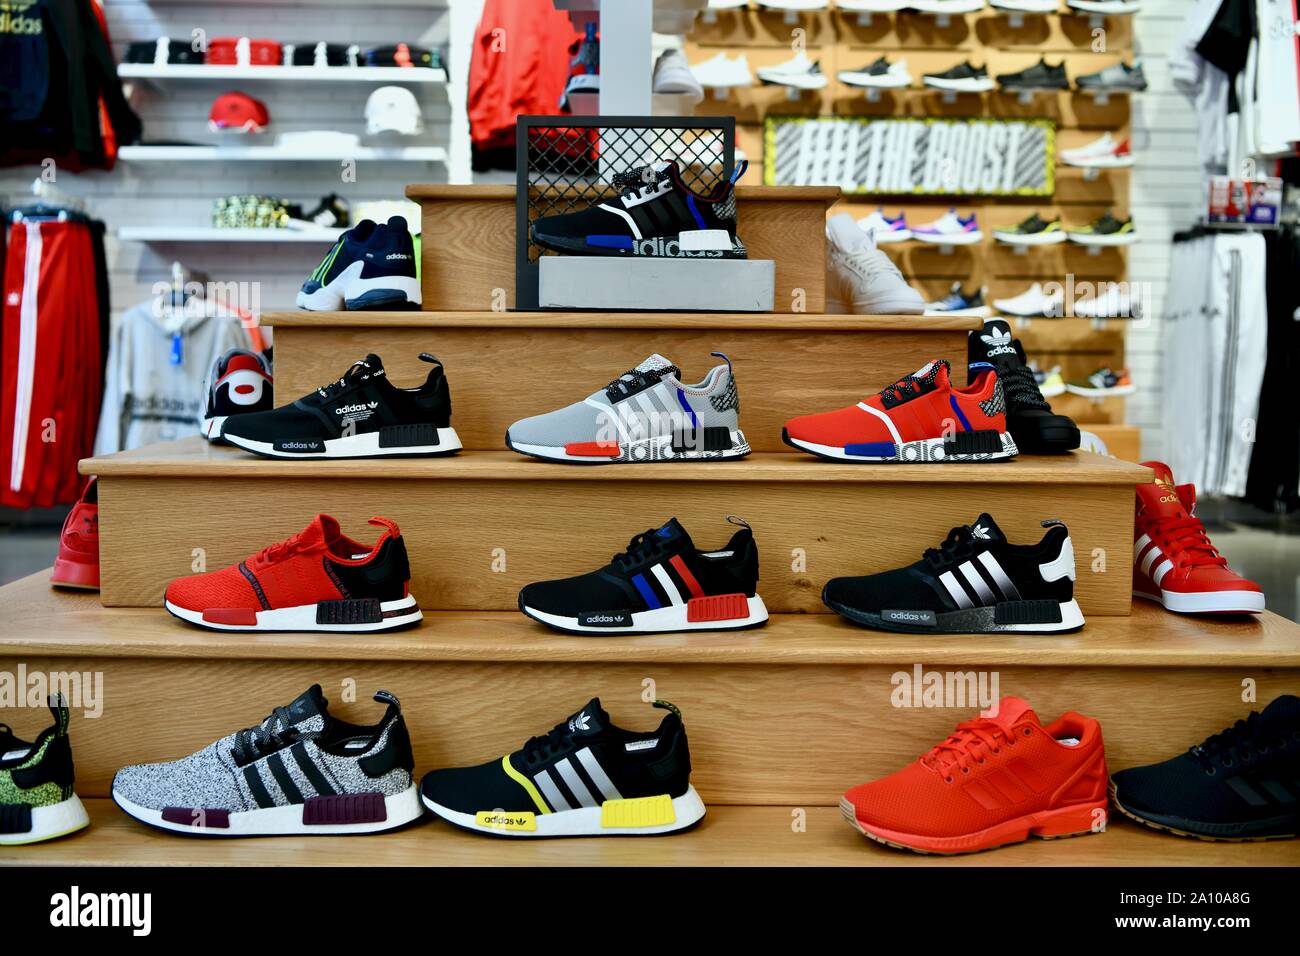 Adidas shoes in the flagship Adidas store in New York City, USA Stock Photo